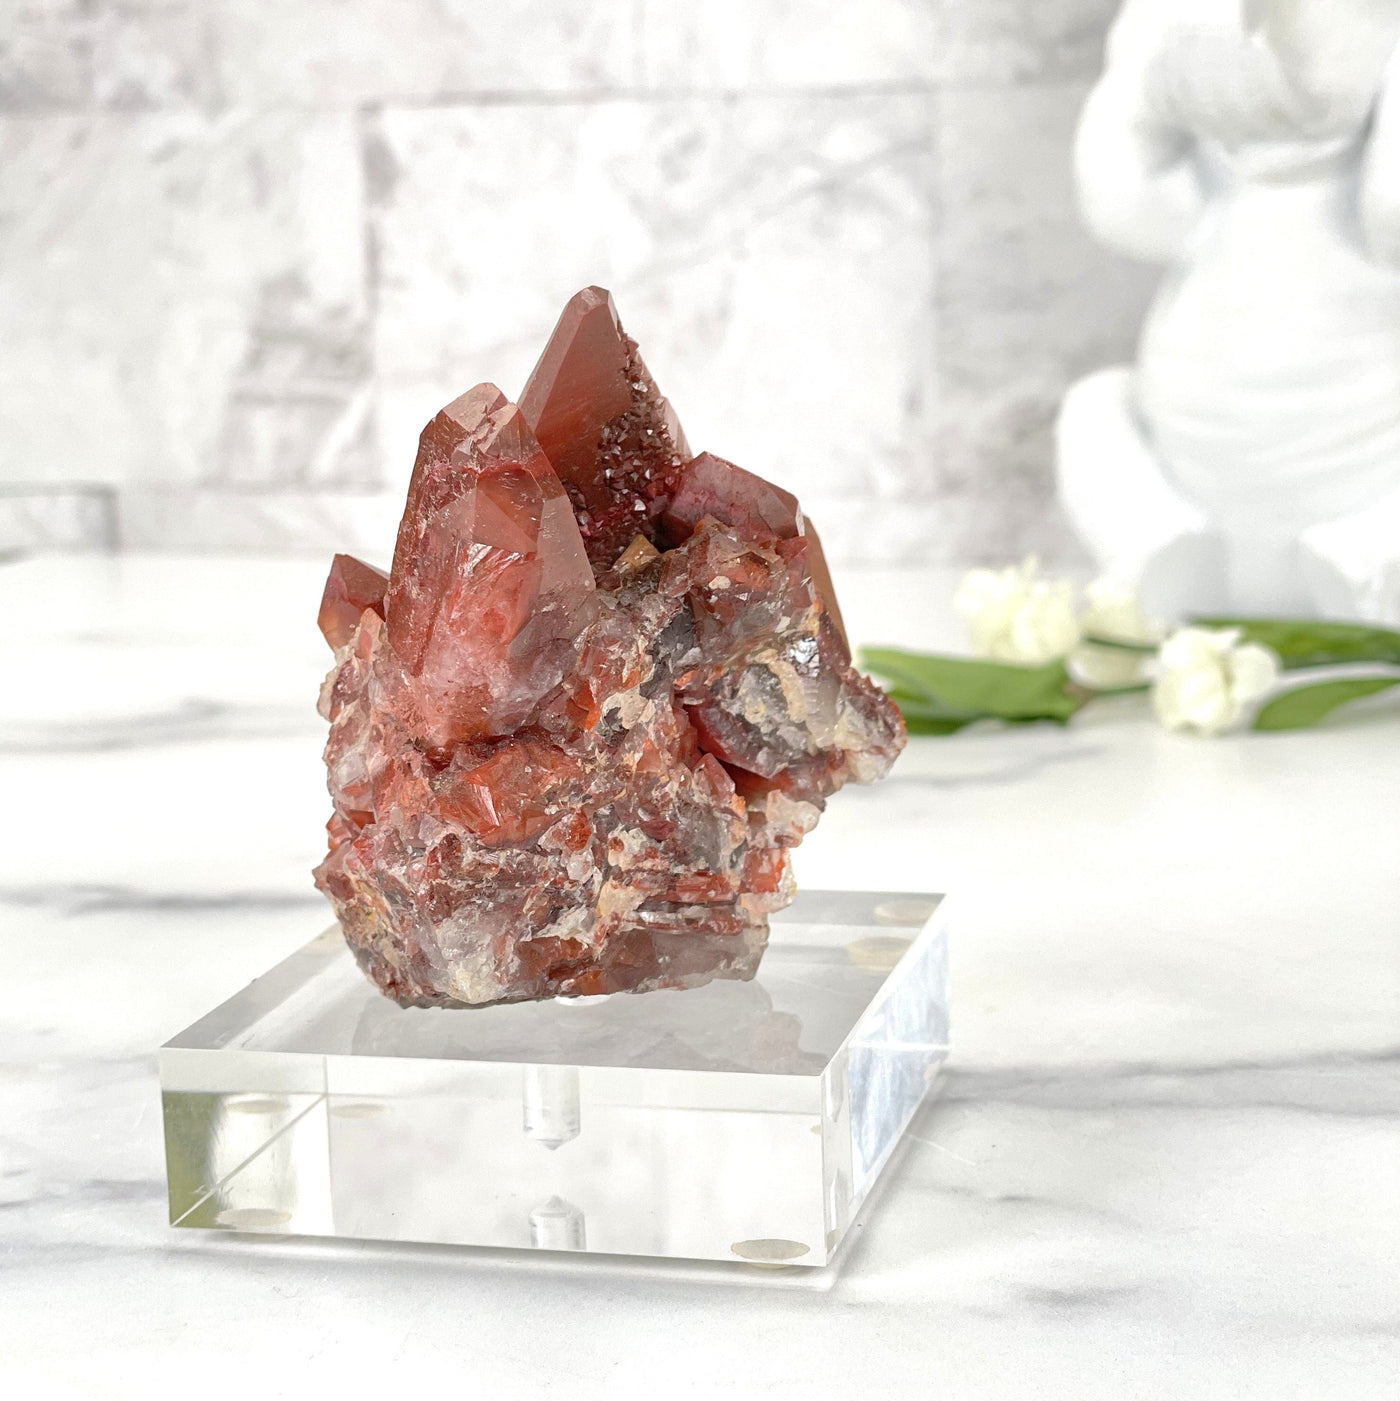 A side angle of the Red hematite Quartz on acrylic stand